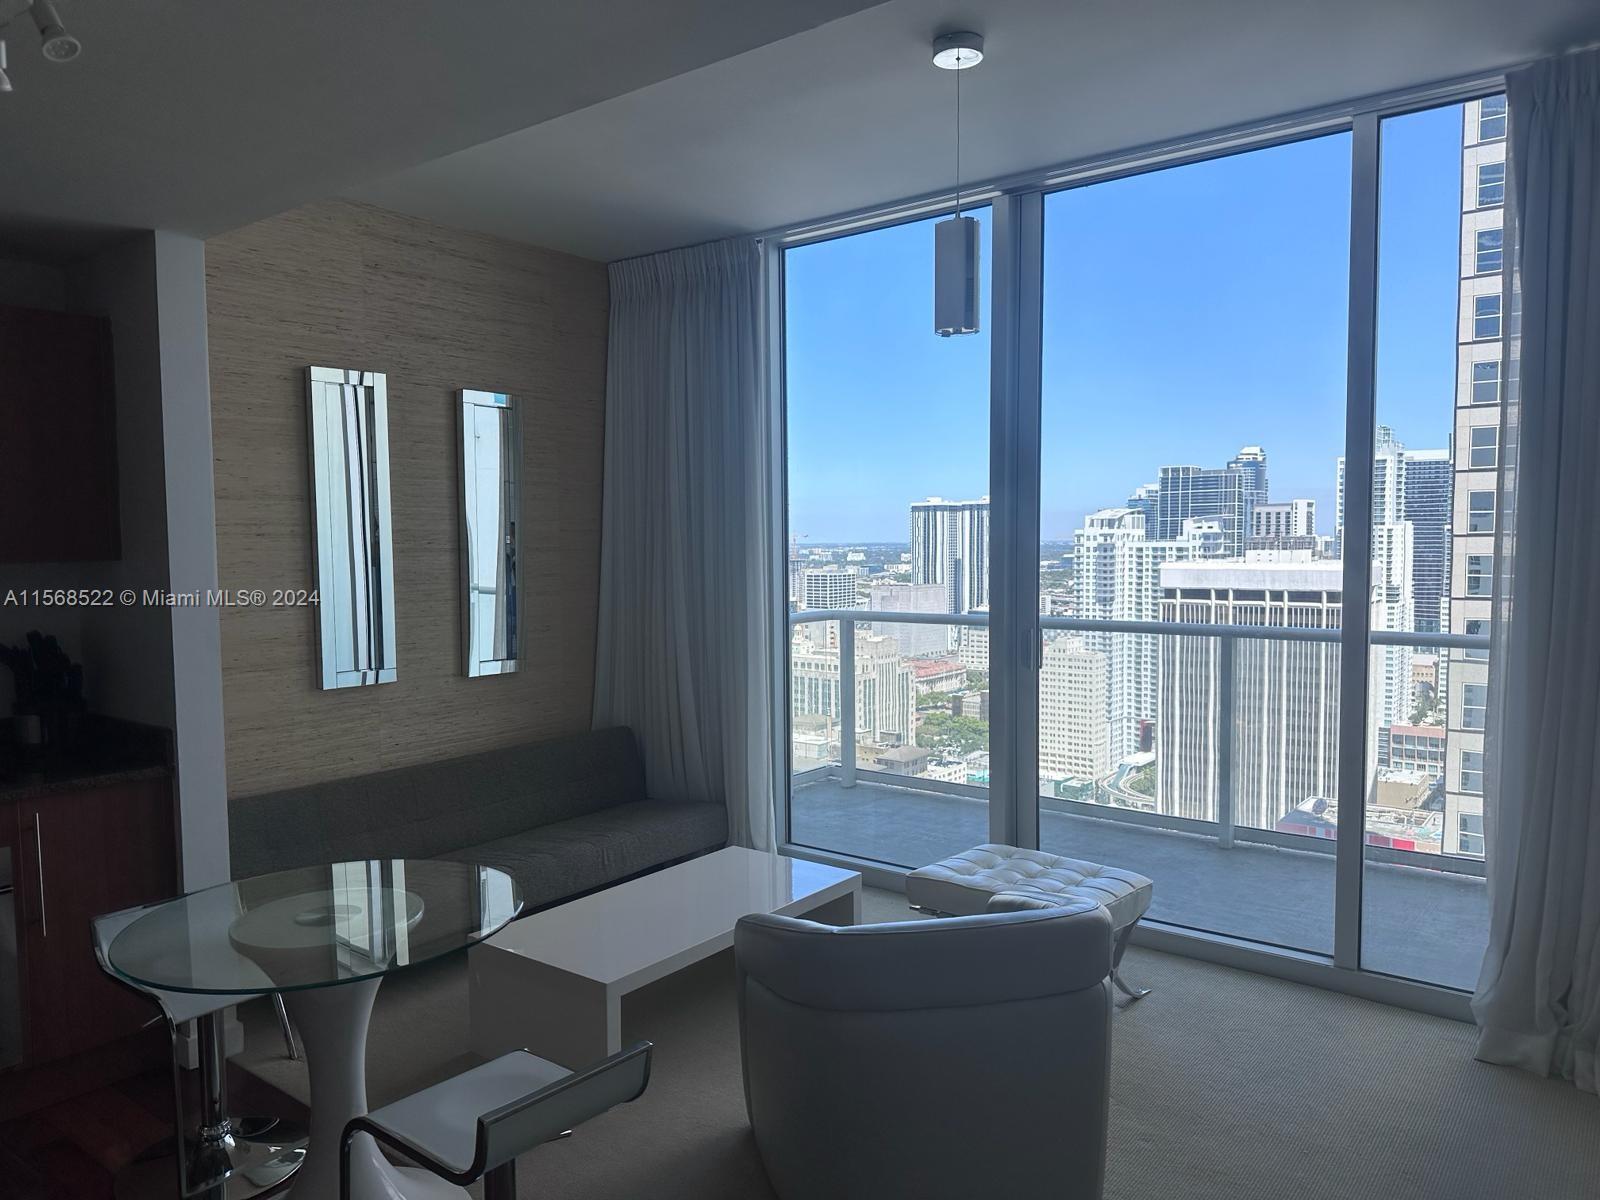 Amazing 1 bedroom, city view. Fully Furnished in the heart of Brickell/Downtown Perfect Rental Opportunity for anyone, ready to move in. Top of the line amenities. Water, Cable TV, Wifi, Parking and 24-Hour Security. Gym, Spa & Sauna, and much more available onsite.